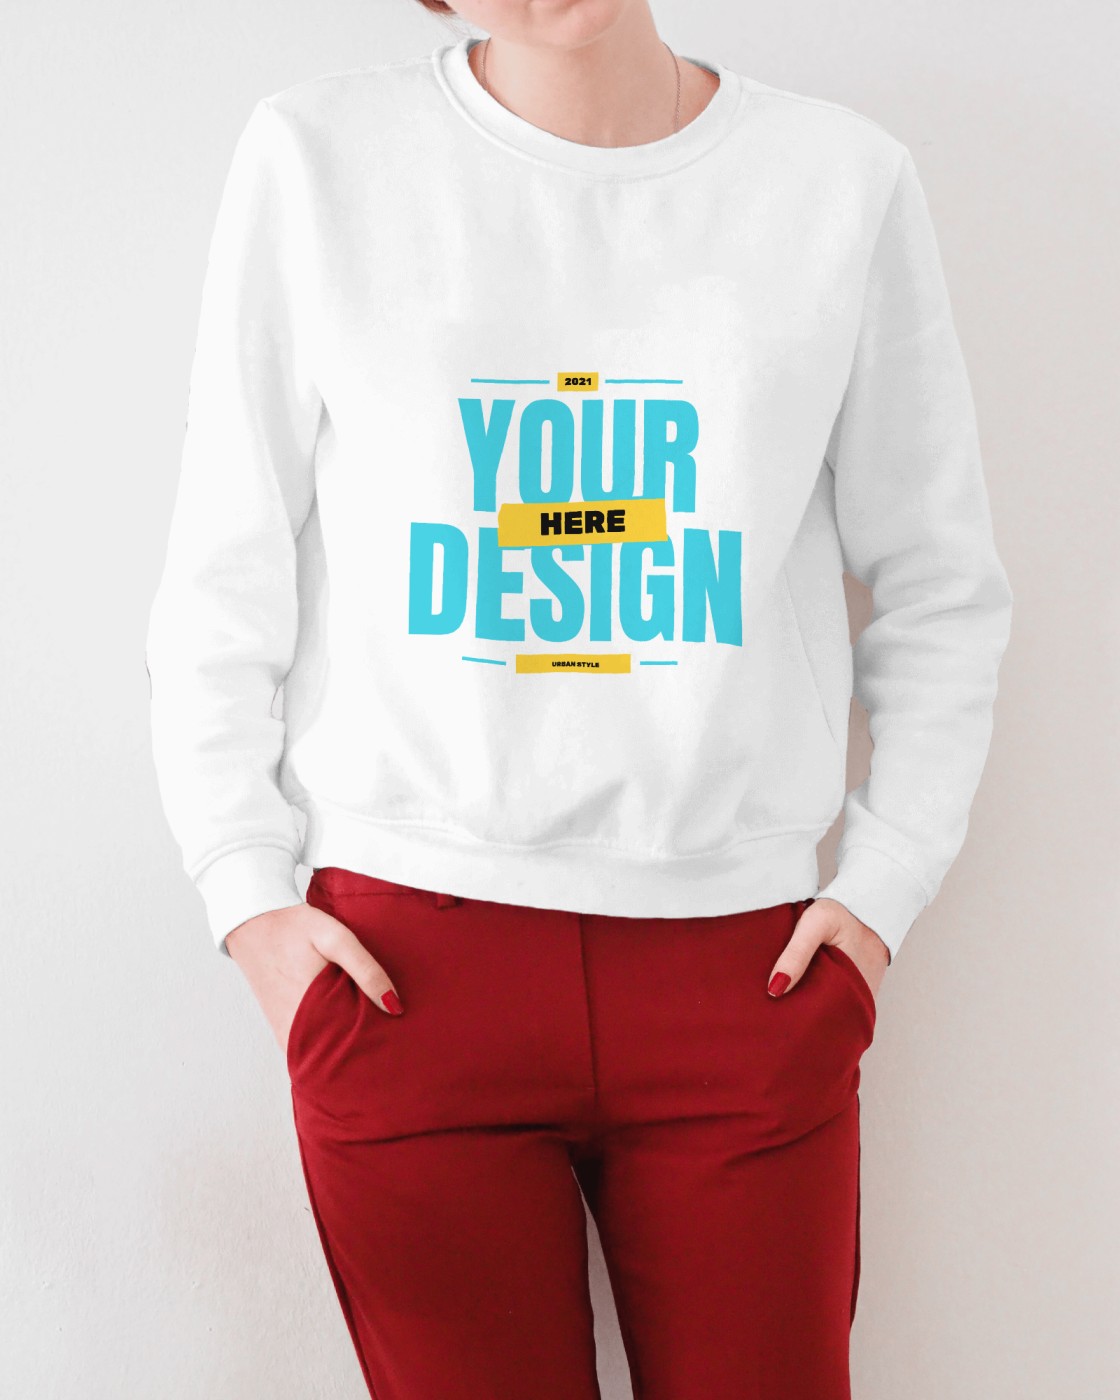 NOW YOU CAN DESIGN YOUR OWN CLOTHES AT CLOTHSZILLA.COM VISIT NOW